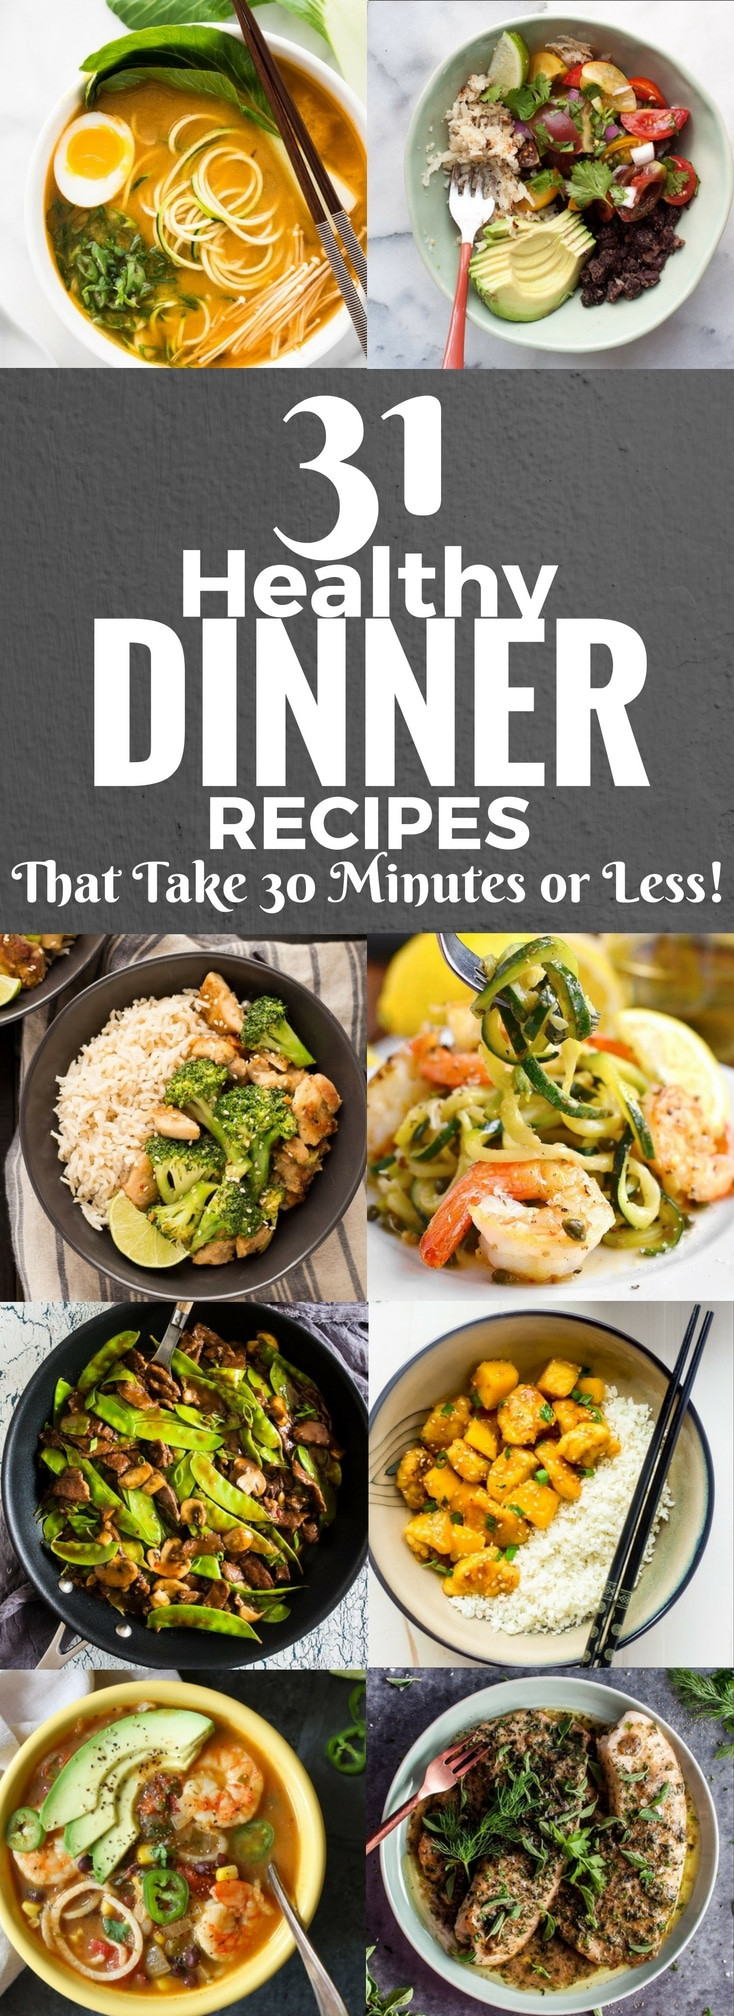 Healthy Things To Eat For Dinner
 31 Healthy Dinner Recipes That Take 30 Minutes or Less